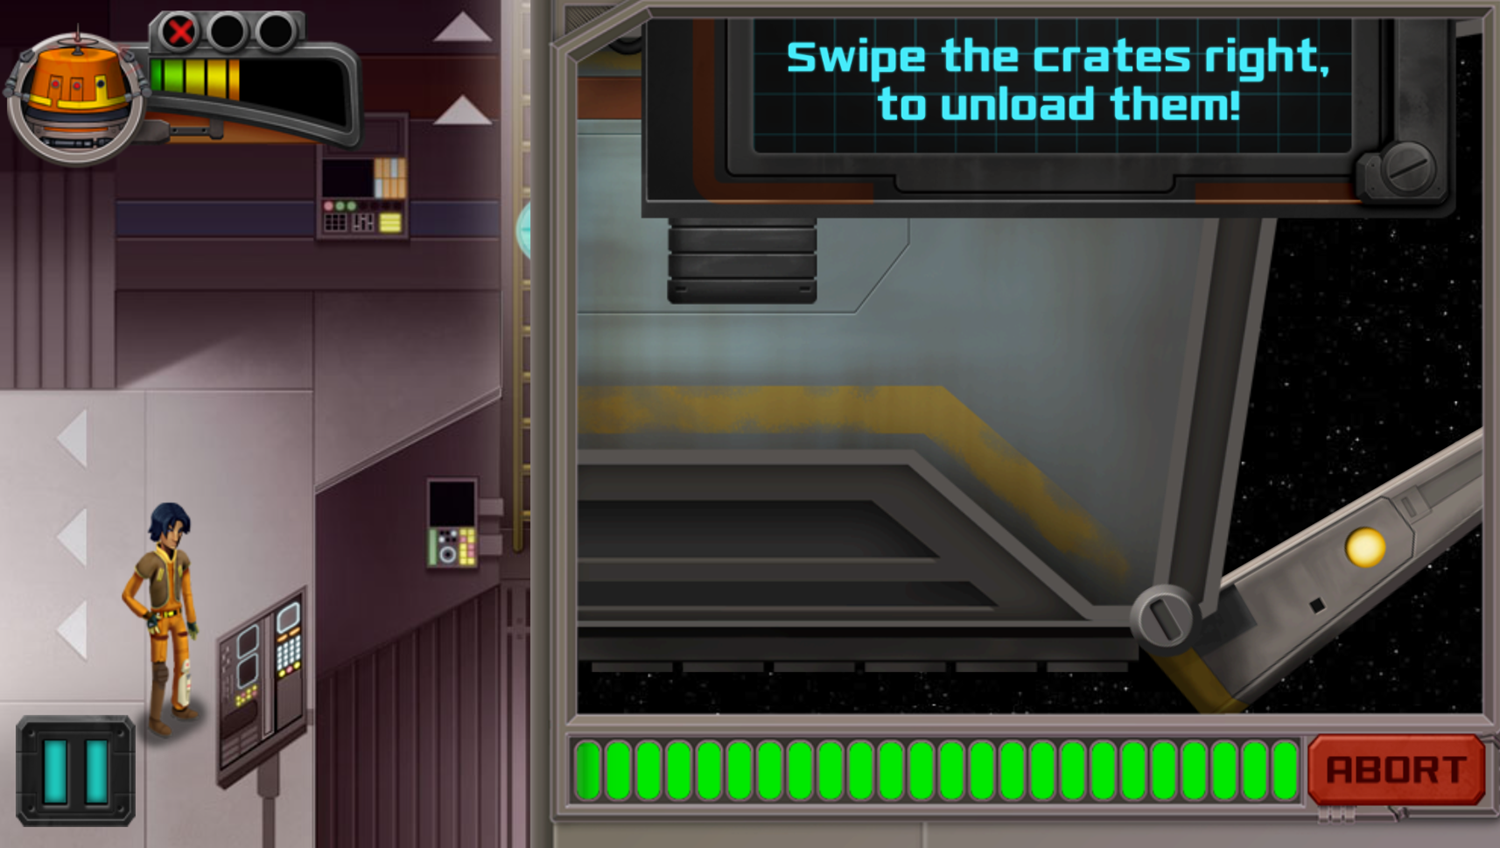 Star Wars Rebels Chopper Chase Game Swing Crates How To Play Screenshot.